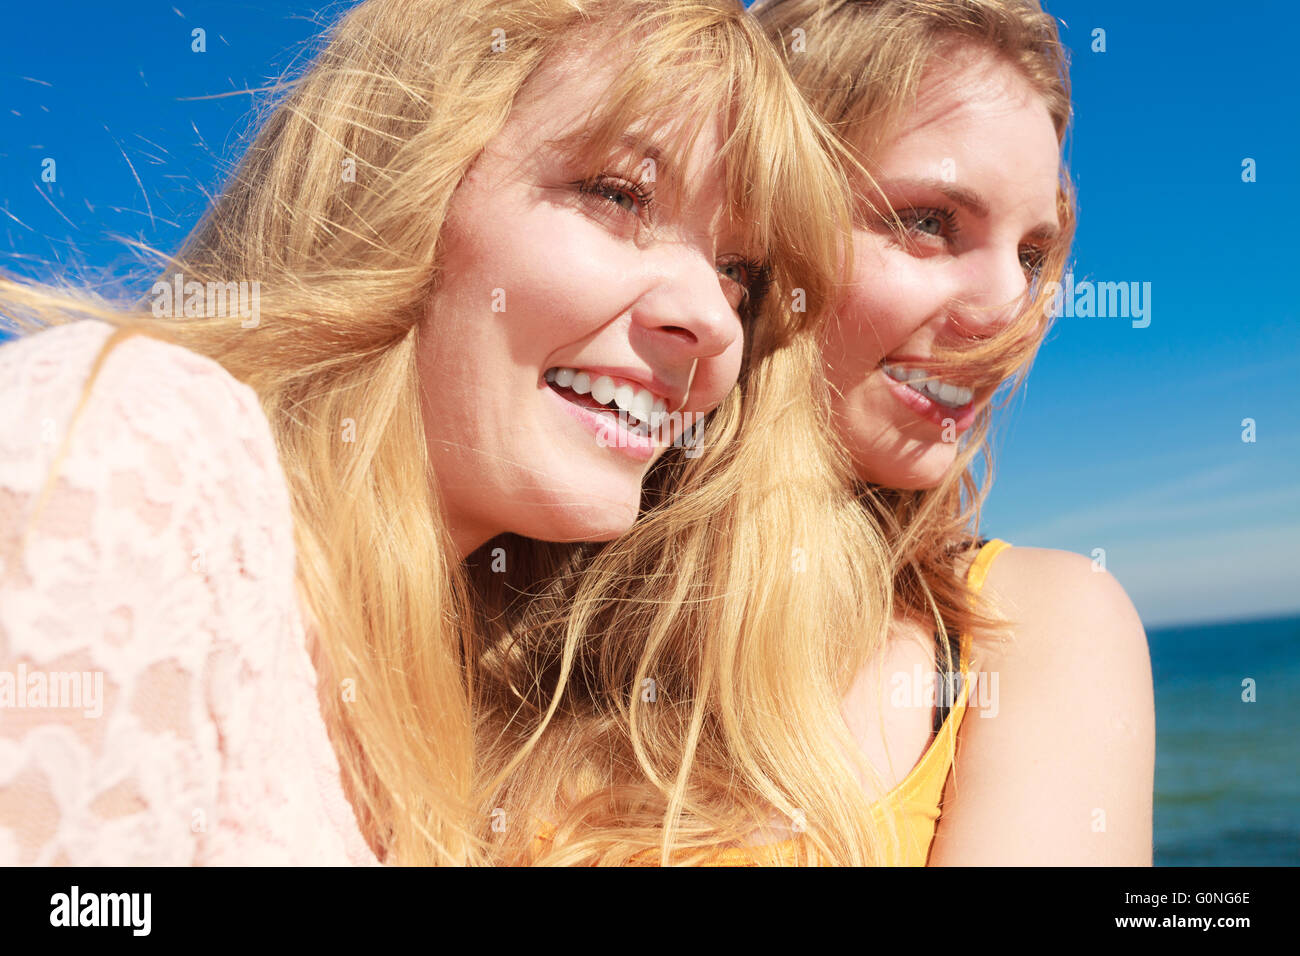 Two young women best friends blonde cheerful girls having fun outdoor wind blowing in hair. Summer happiness friendship concept. Stock Photo